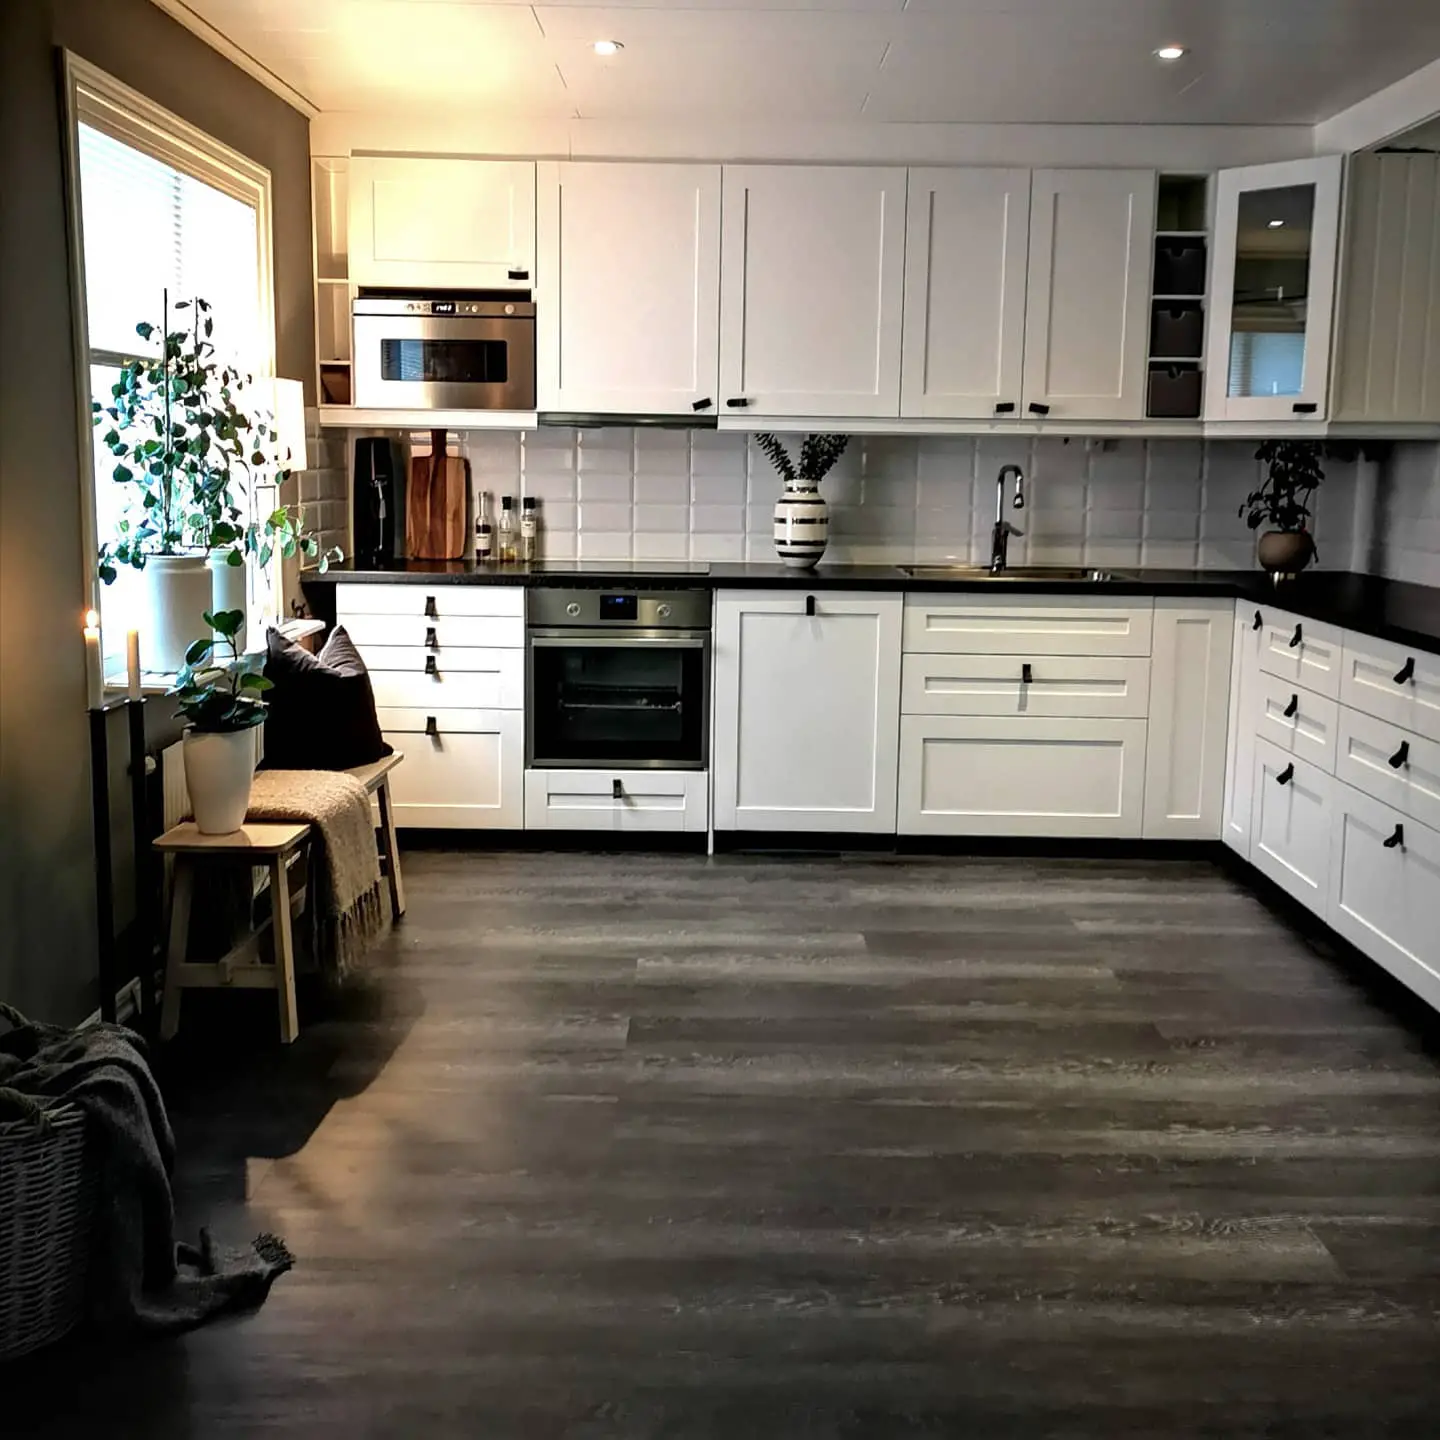 A kitchen with white cabinets and wood floors featuring a black kitchen floor.